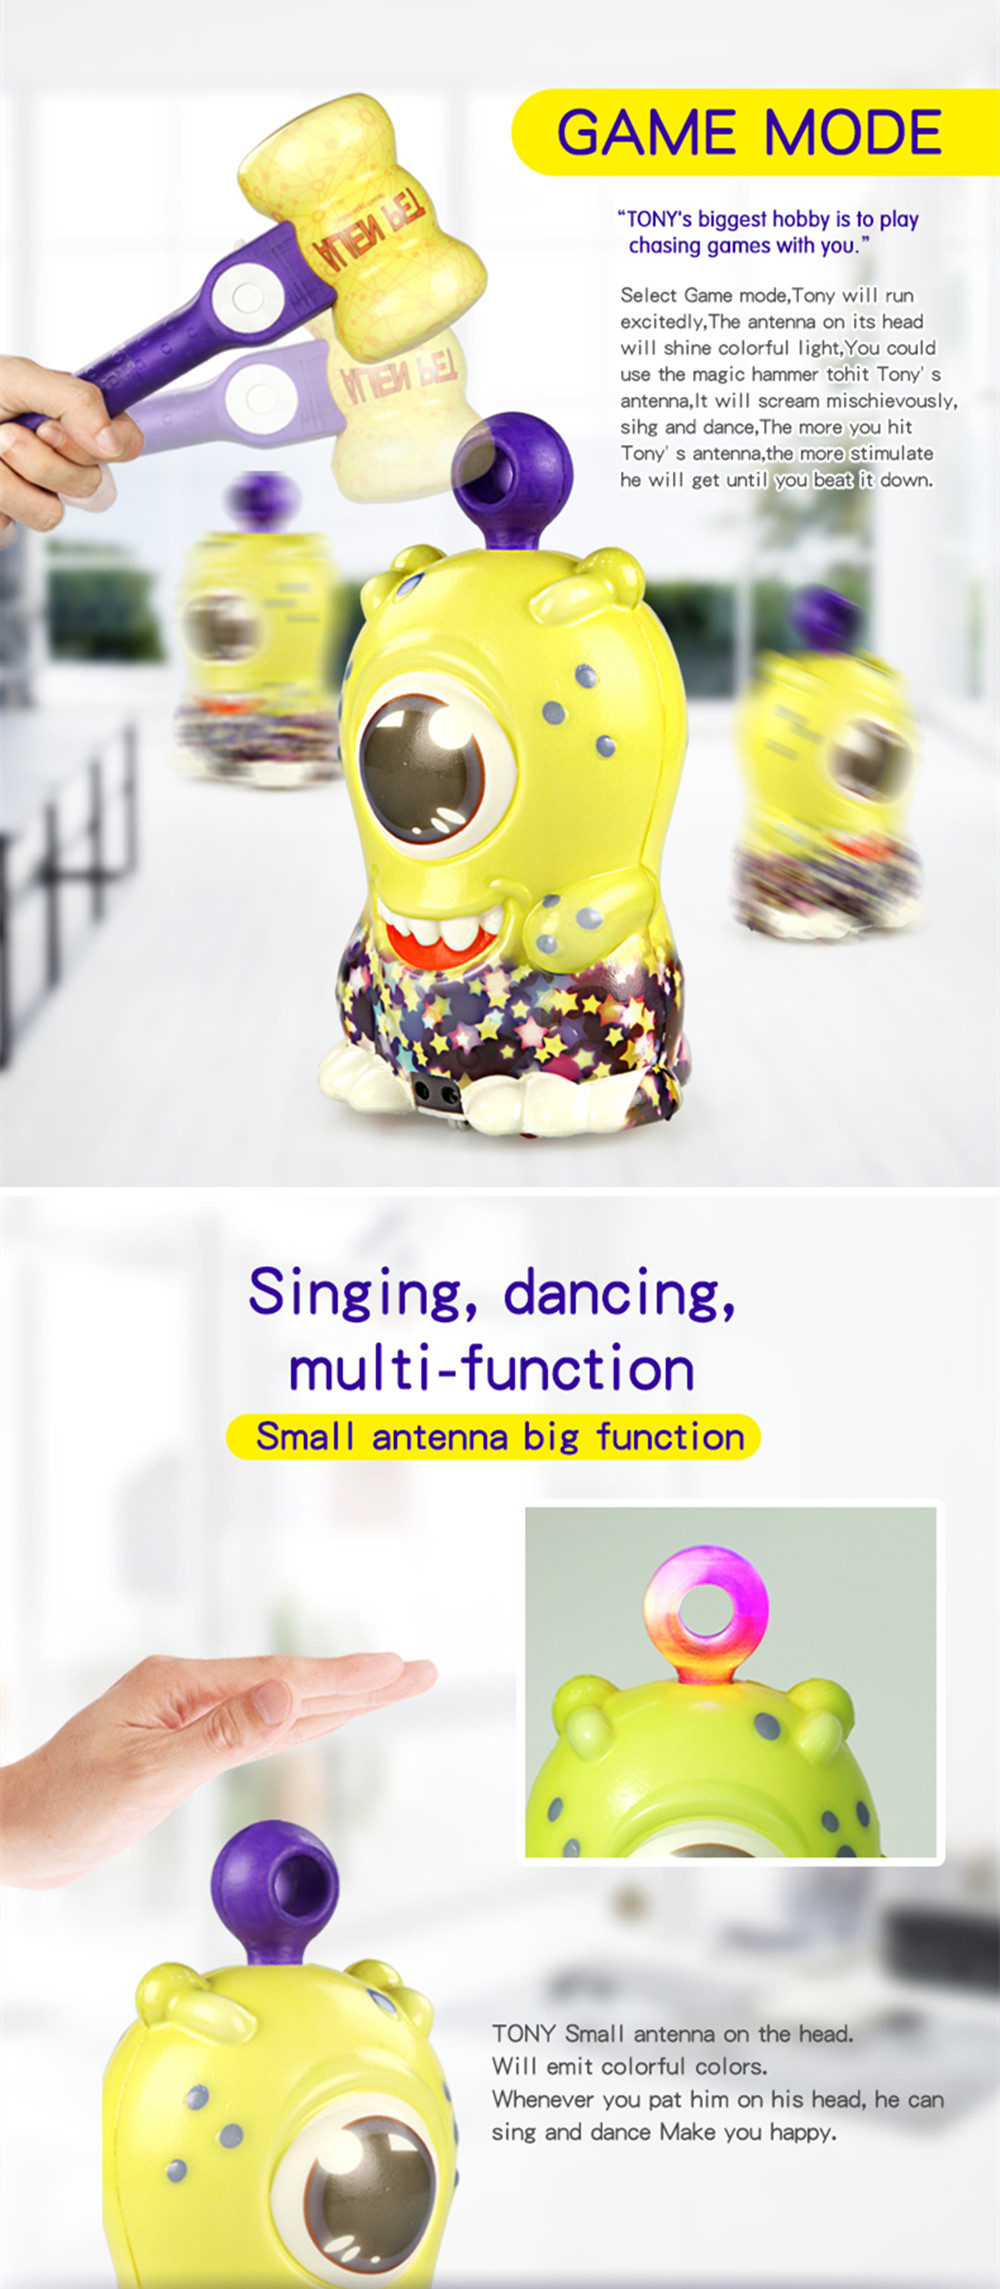 ALIEN-TONY-3-Modes-Infrared-Control-Dancing-Singing-PU-Robot-Toy-1347947